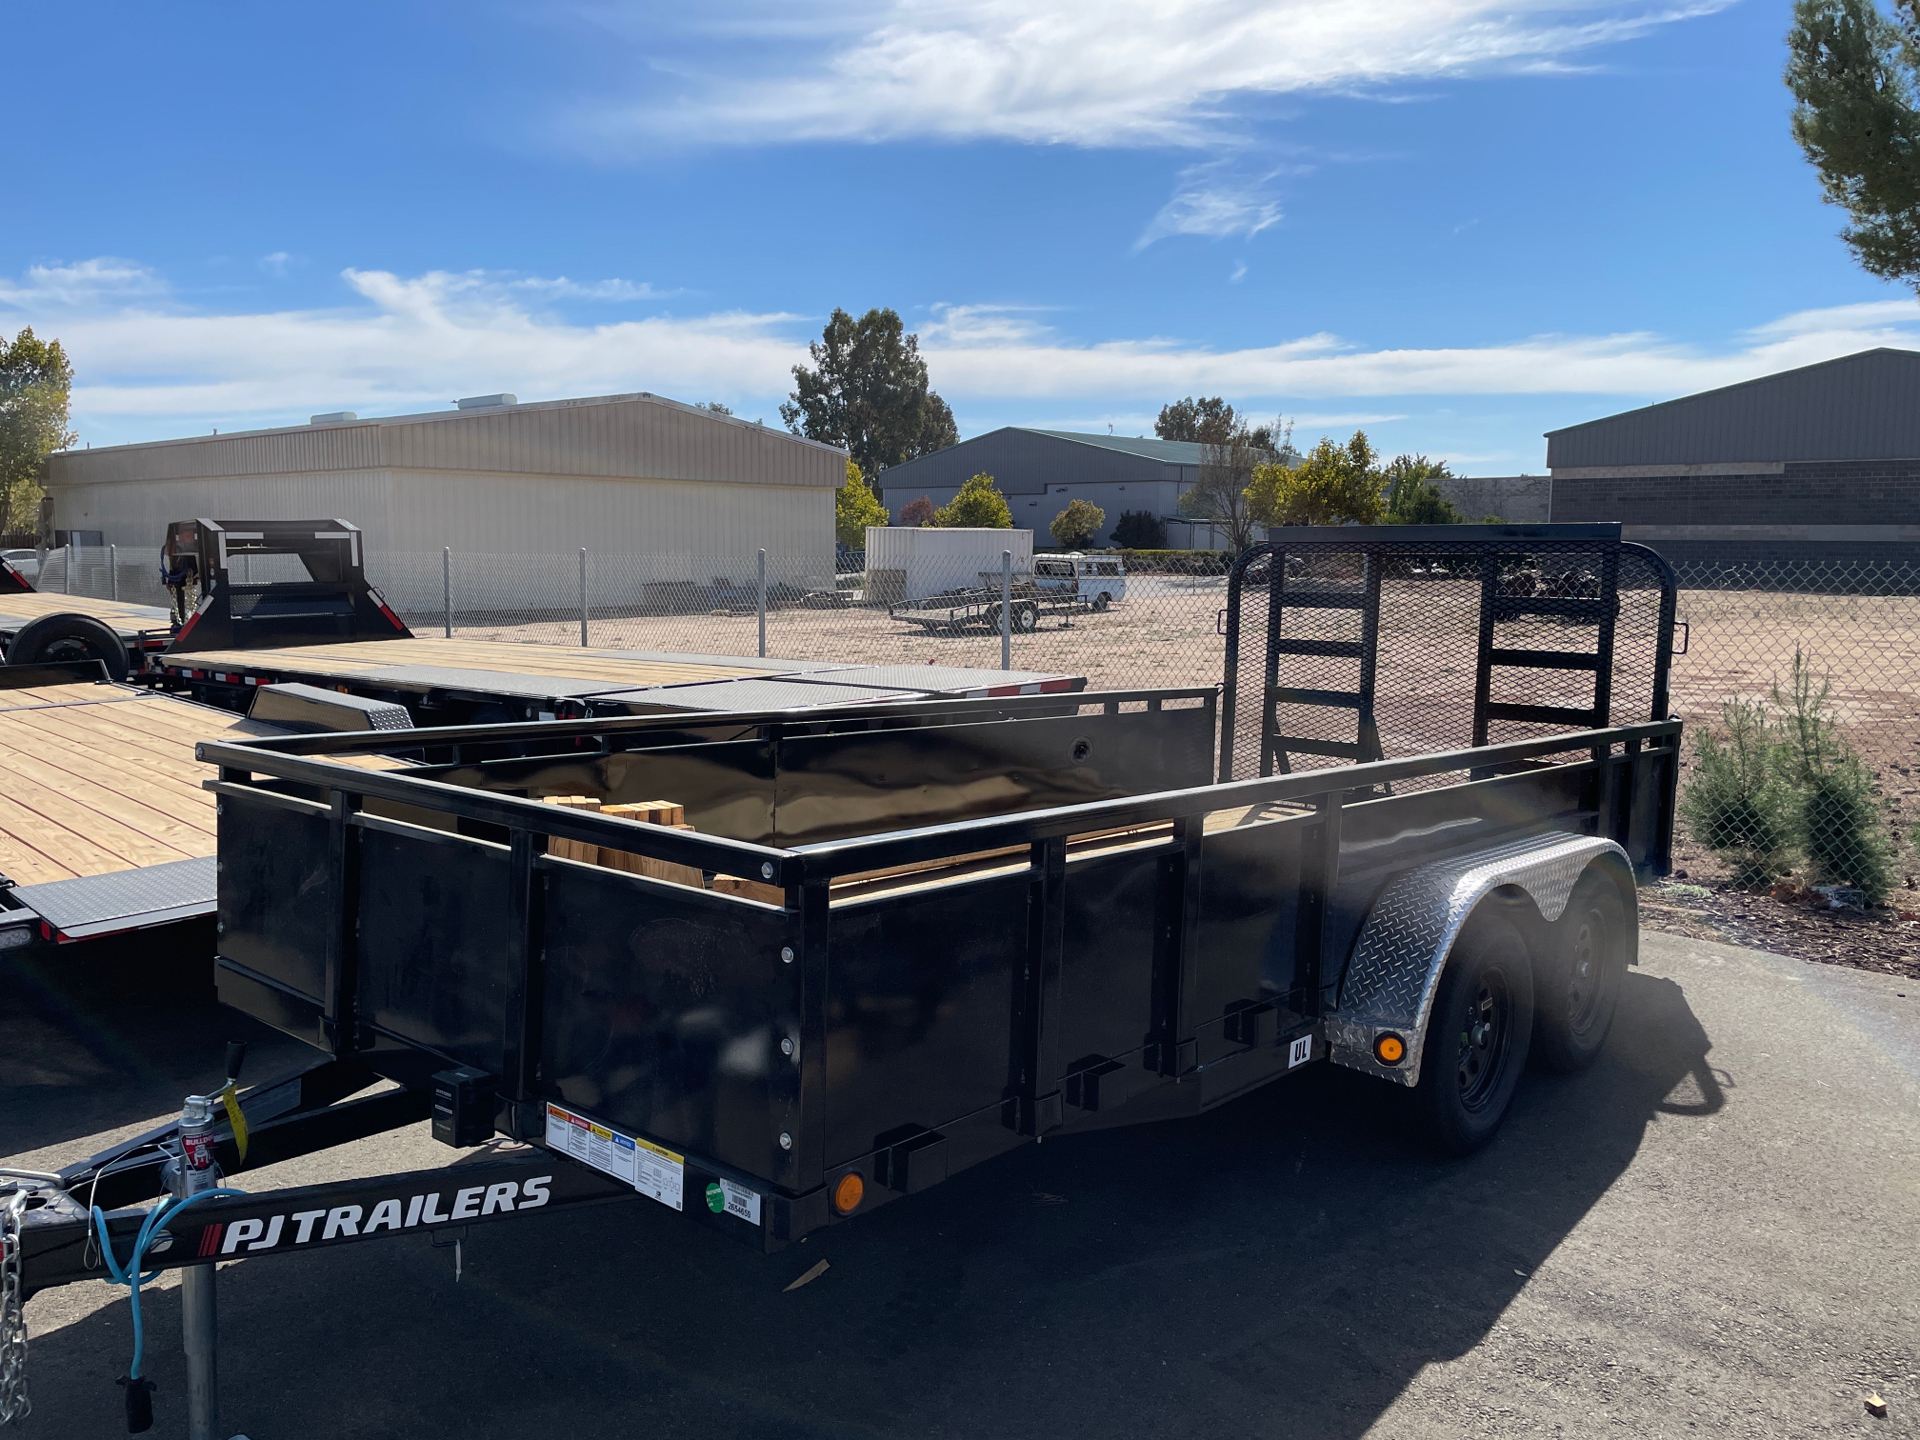 2023 PJ Trailers 83 in. Tandem Axle Channel Utility (UL) 16 ft. in Paso Robles, California - Photo 1